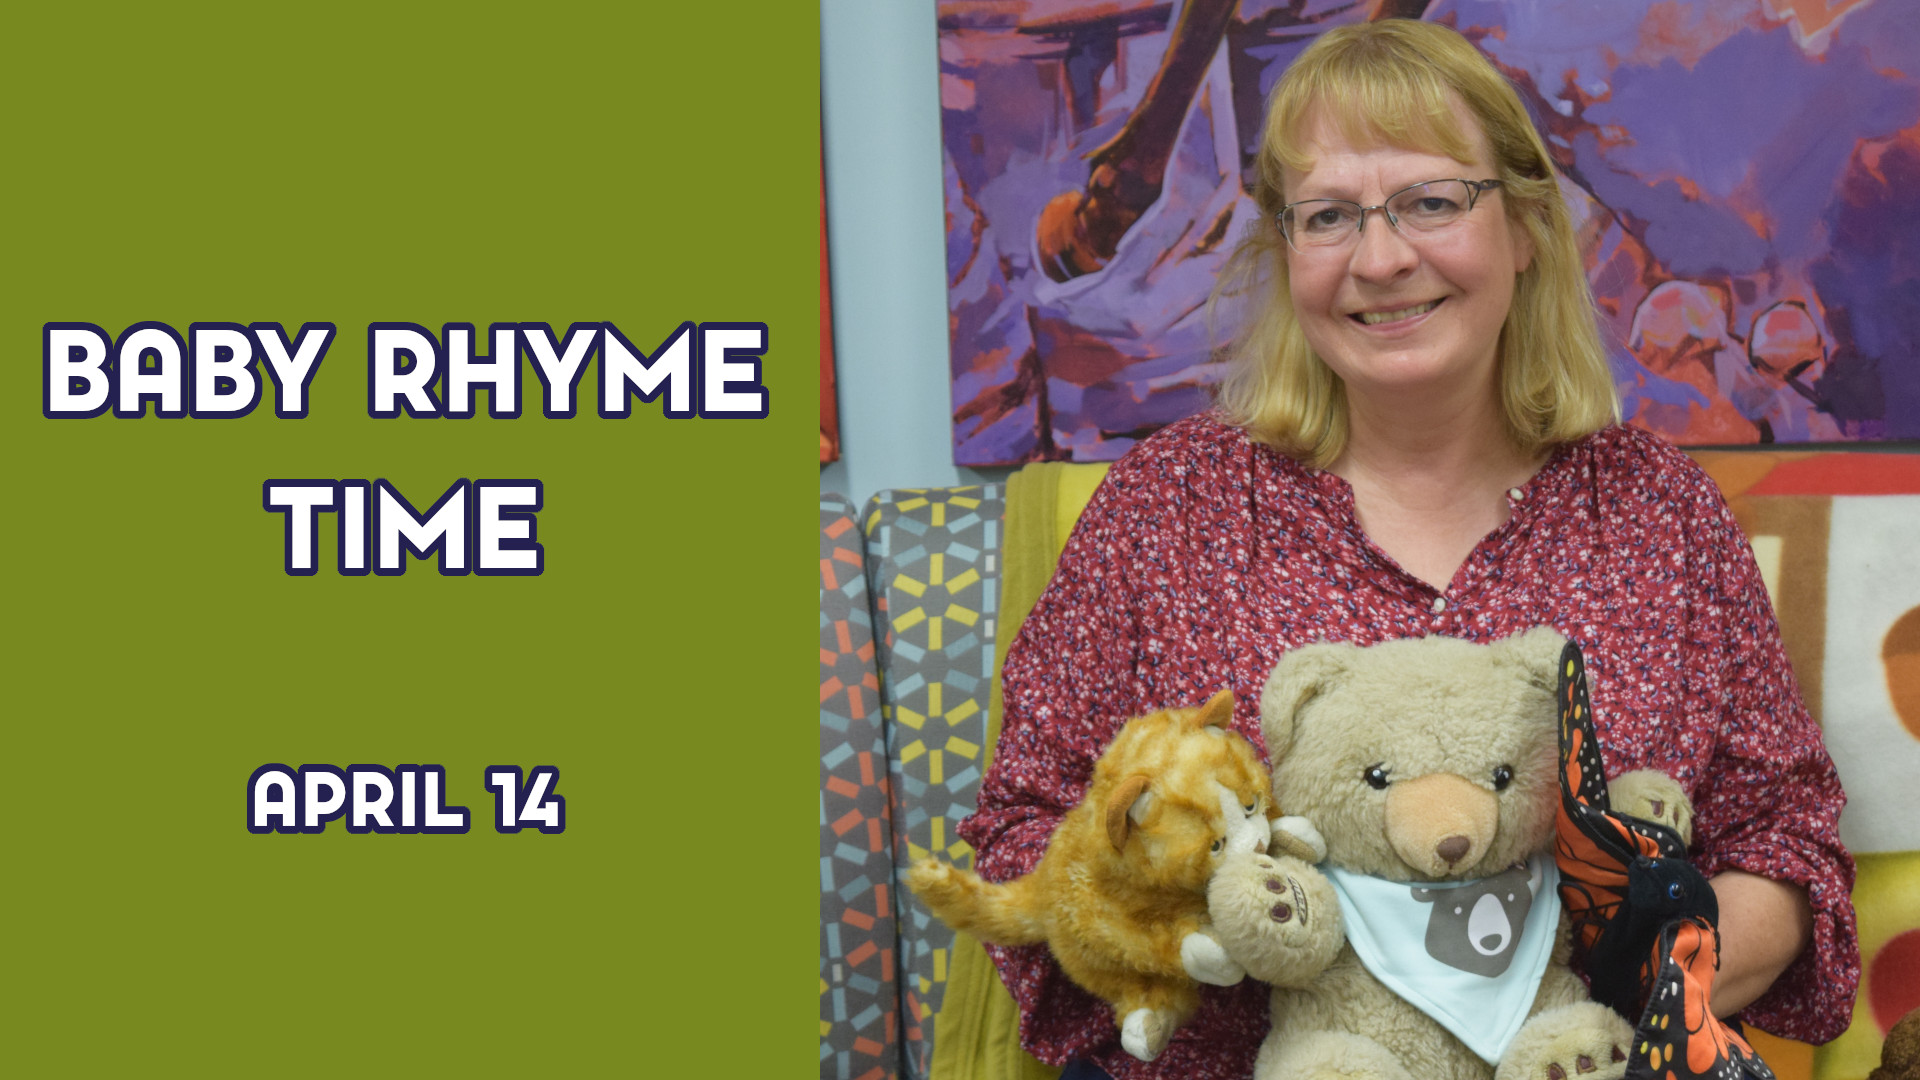 A woman holds some stuffed animals next to the text "Baby Rhyme Time April 14"